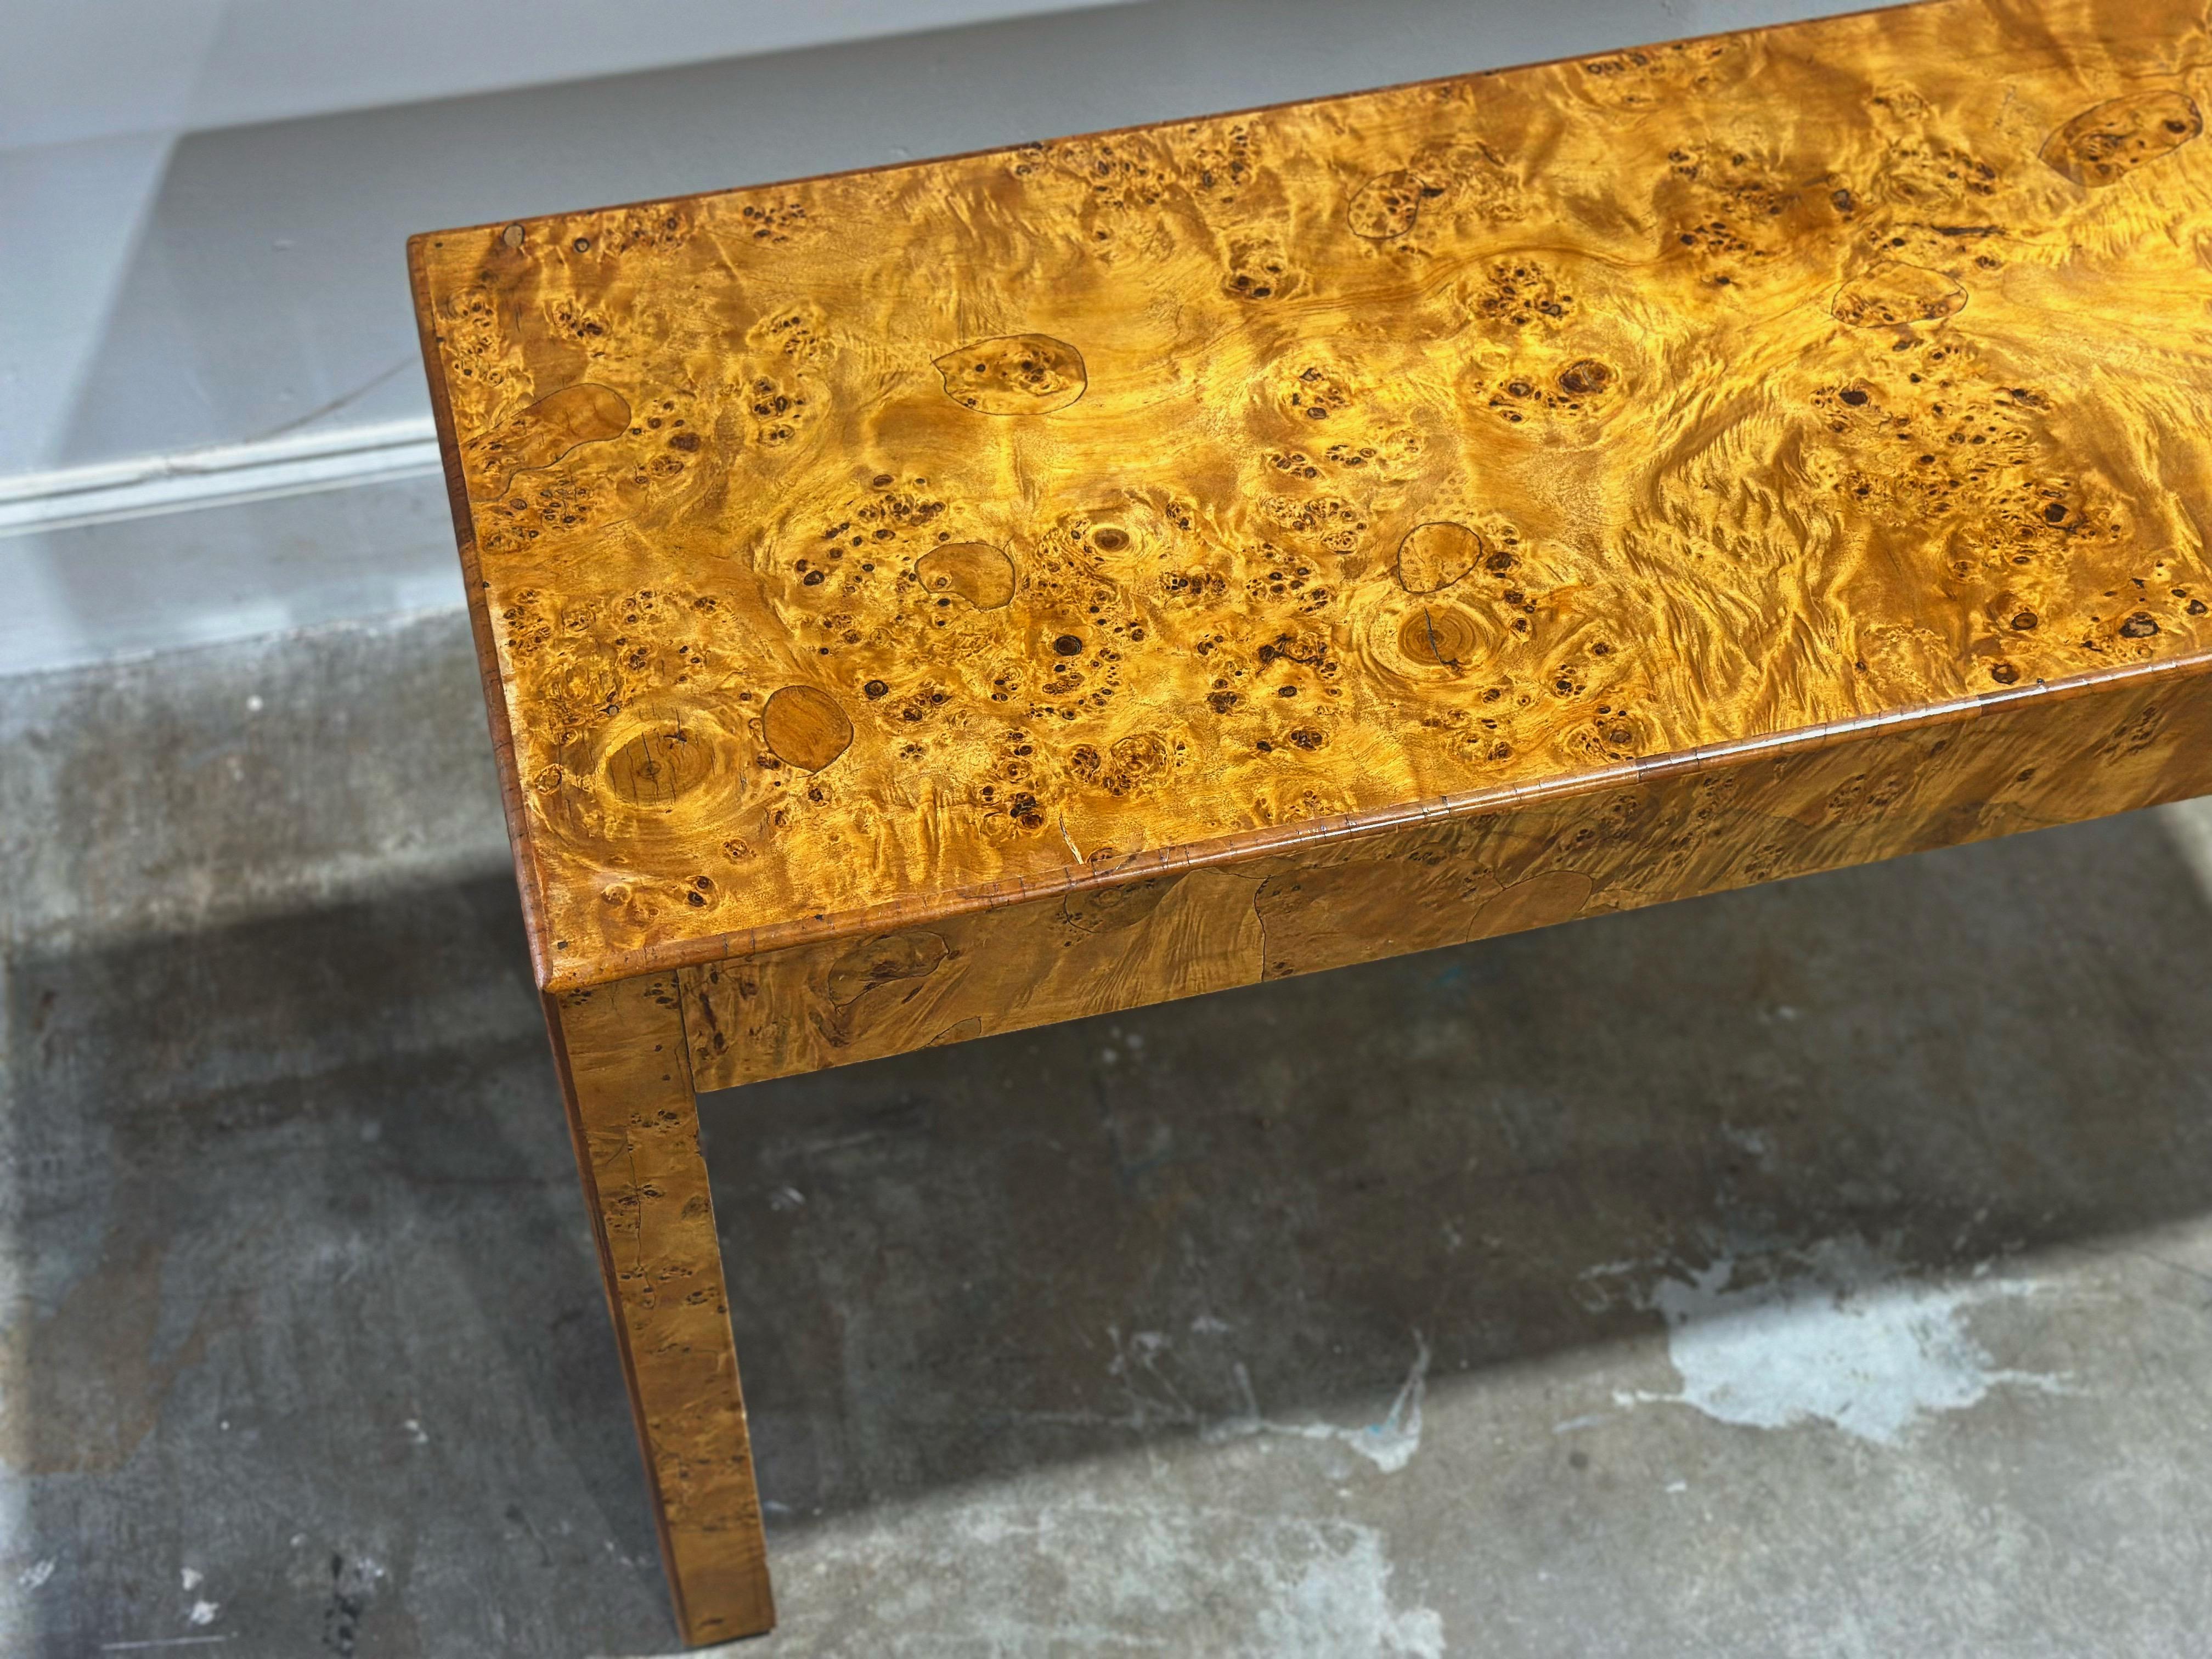 Stunning Mid Century Parsons style console or sofa table - Italy circa 1970s. Highly figured burl maple.
Stamped 